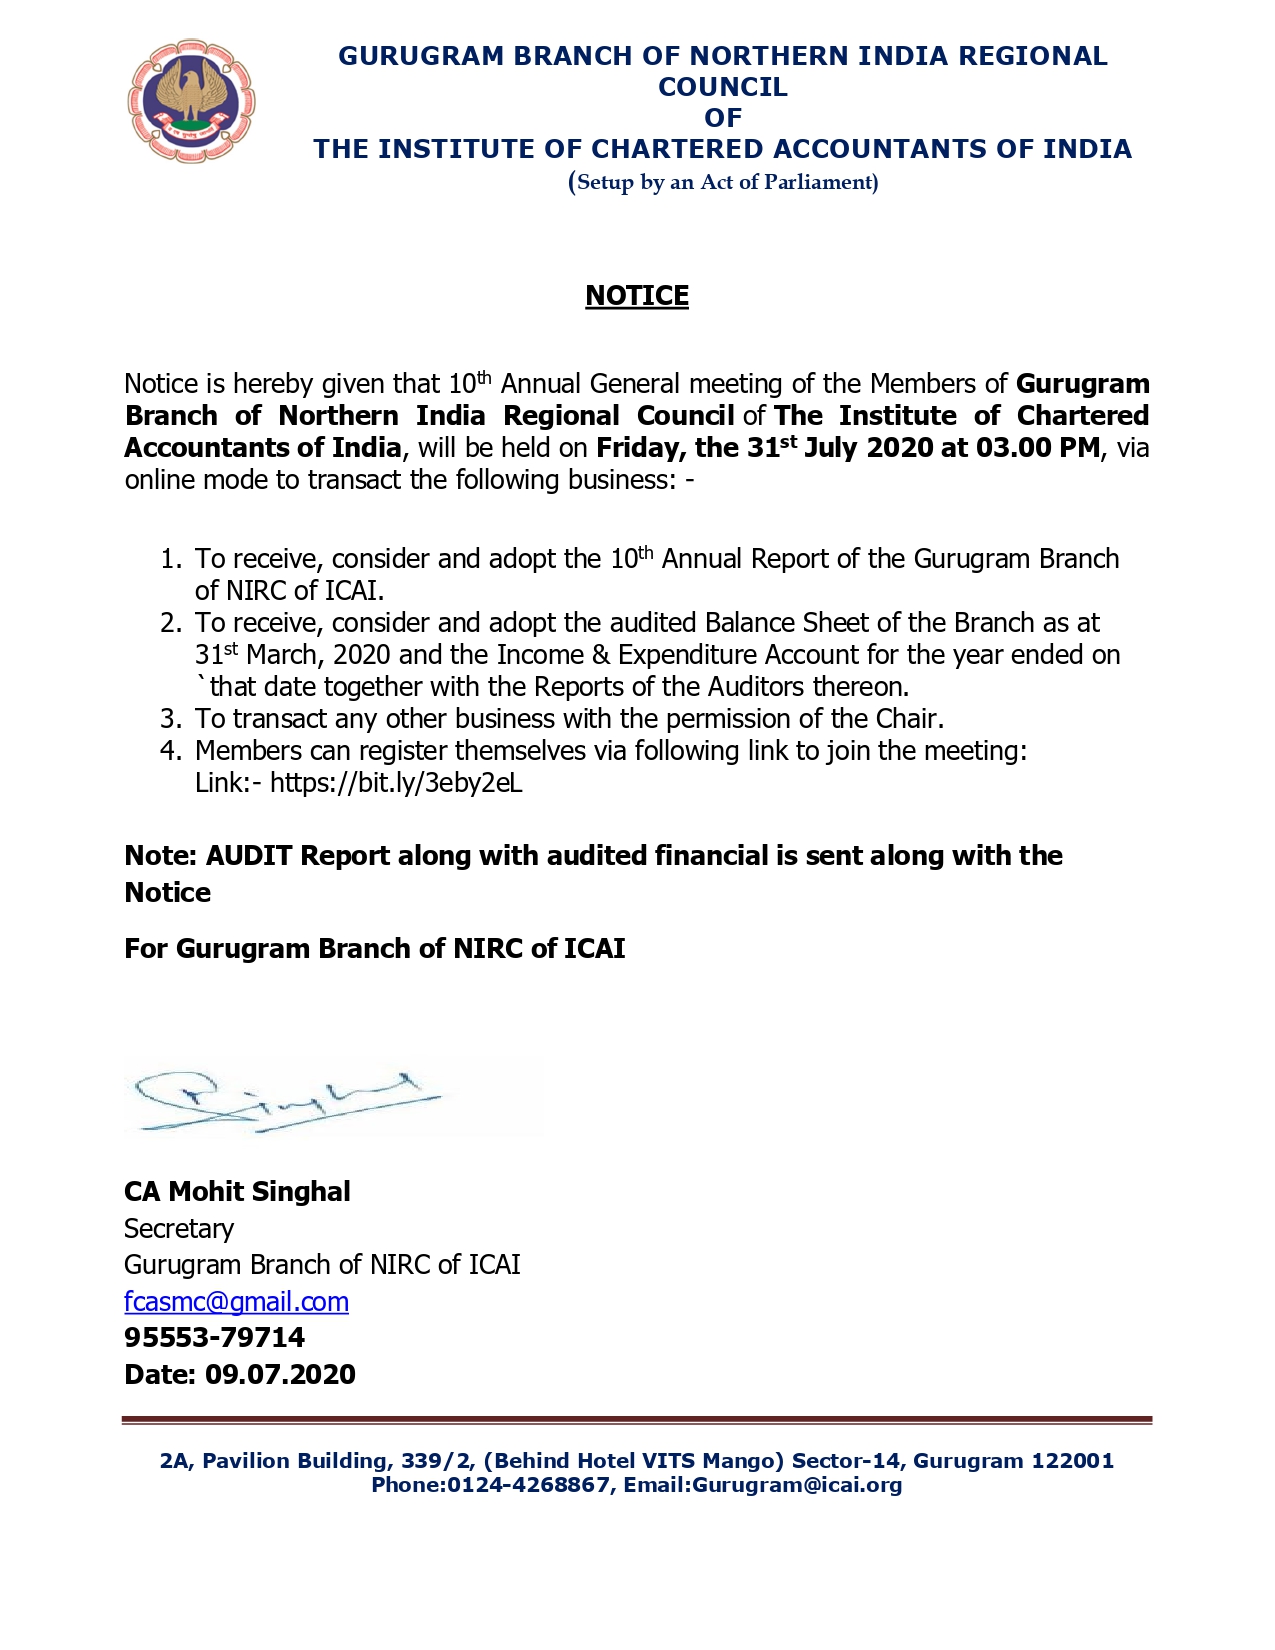 Notice for AGM of Gurugram Branch of NIRC of ICAI-FY 2019-20